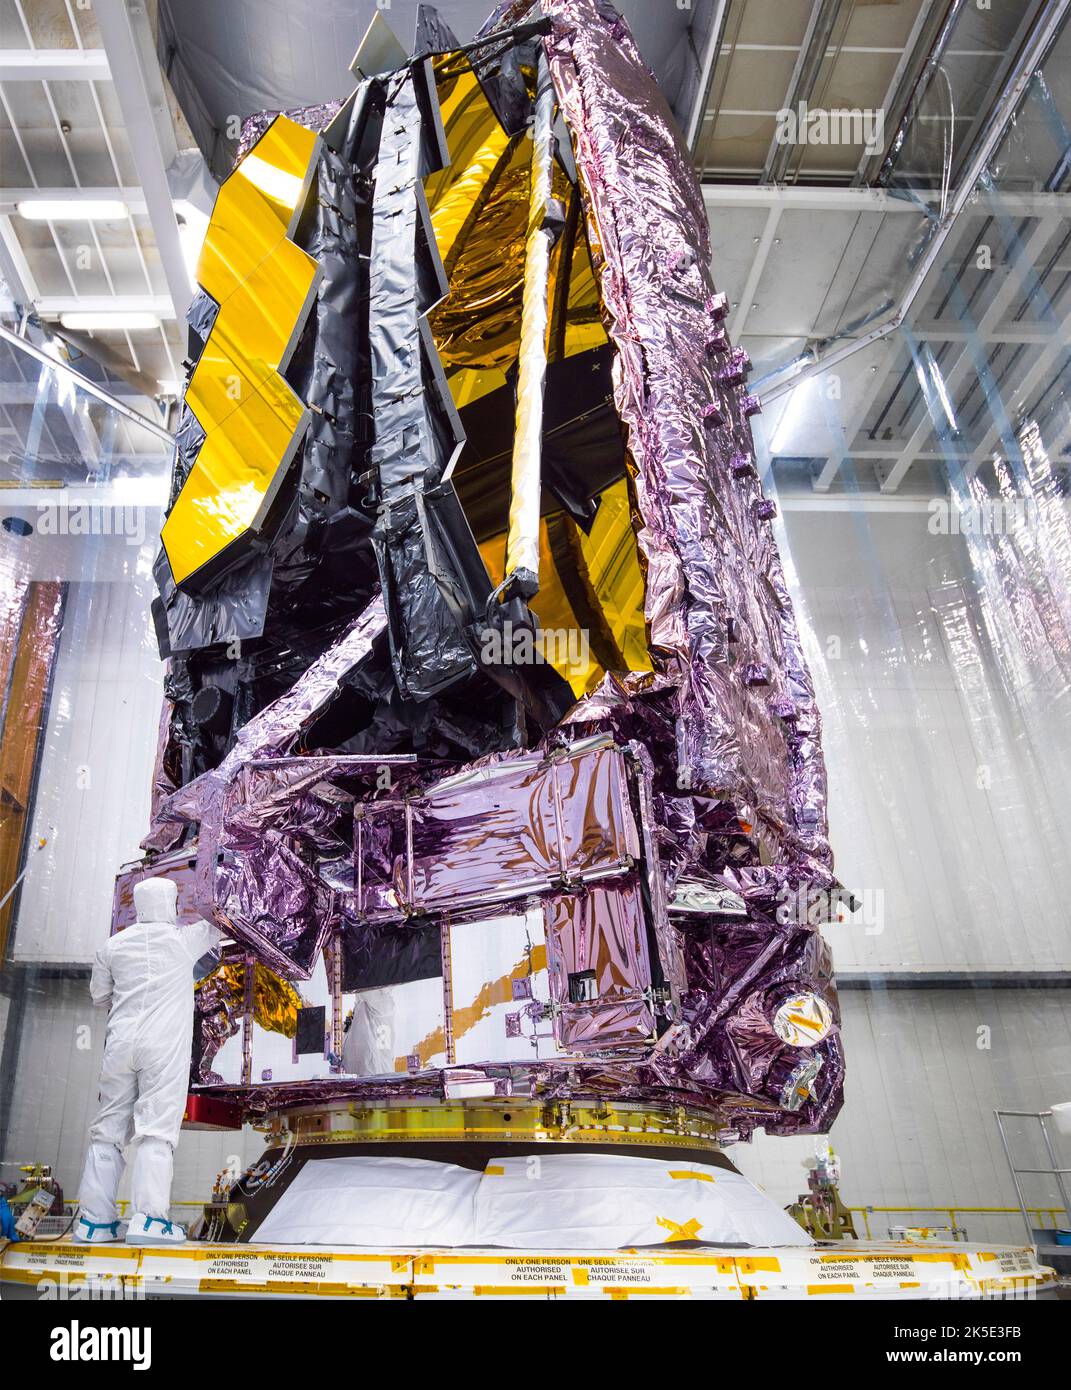 James Webb Space Telescope (JWST) on Launcher. This image shows the James Webb Space Telescope atop its launch vehicle, but before it was encapsulated in the rocket fairing. You can see a protective clean tent around the telescope. The JWST was launched on 25 December 2021  An optimised version of a NASA image by experienced lead photographer Chris Gunn. Credit: NASA/Chris Gunn. For editorial use only. Stock Photo